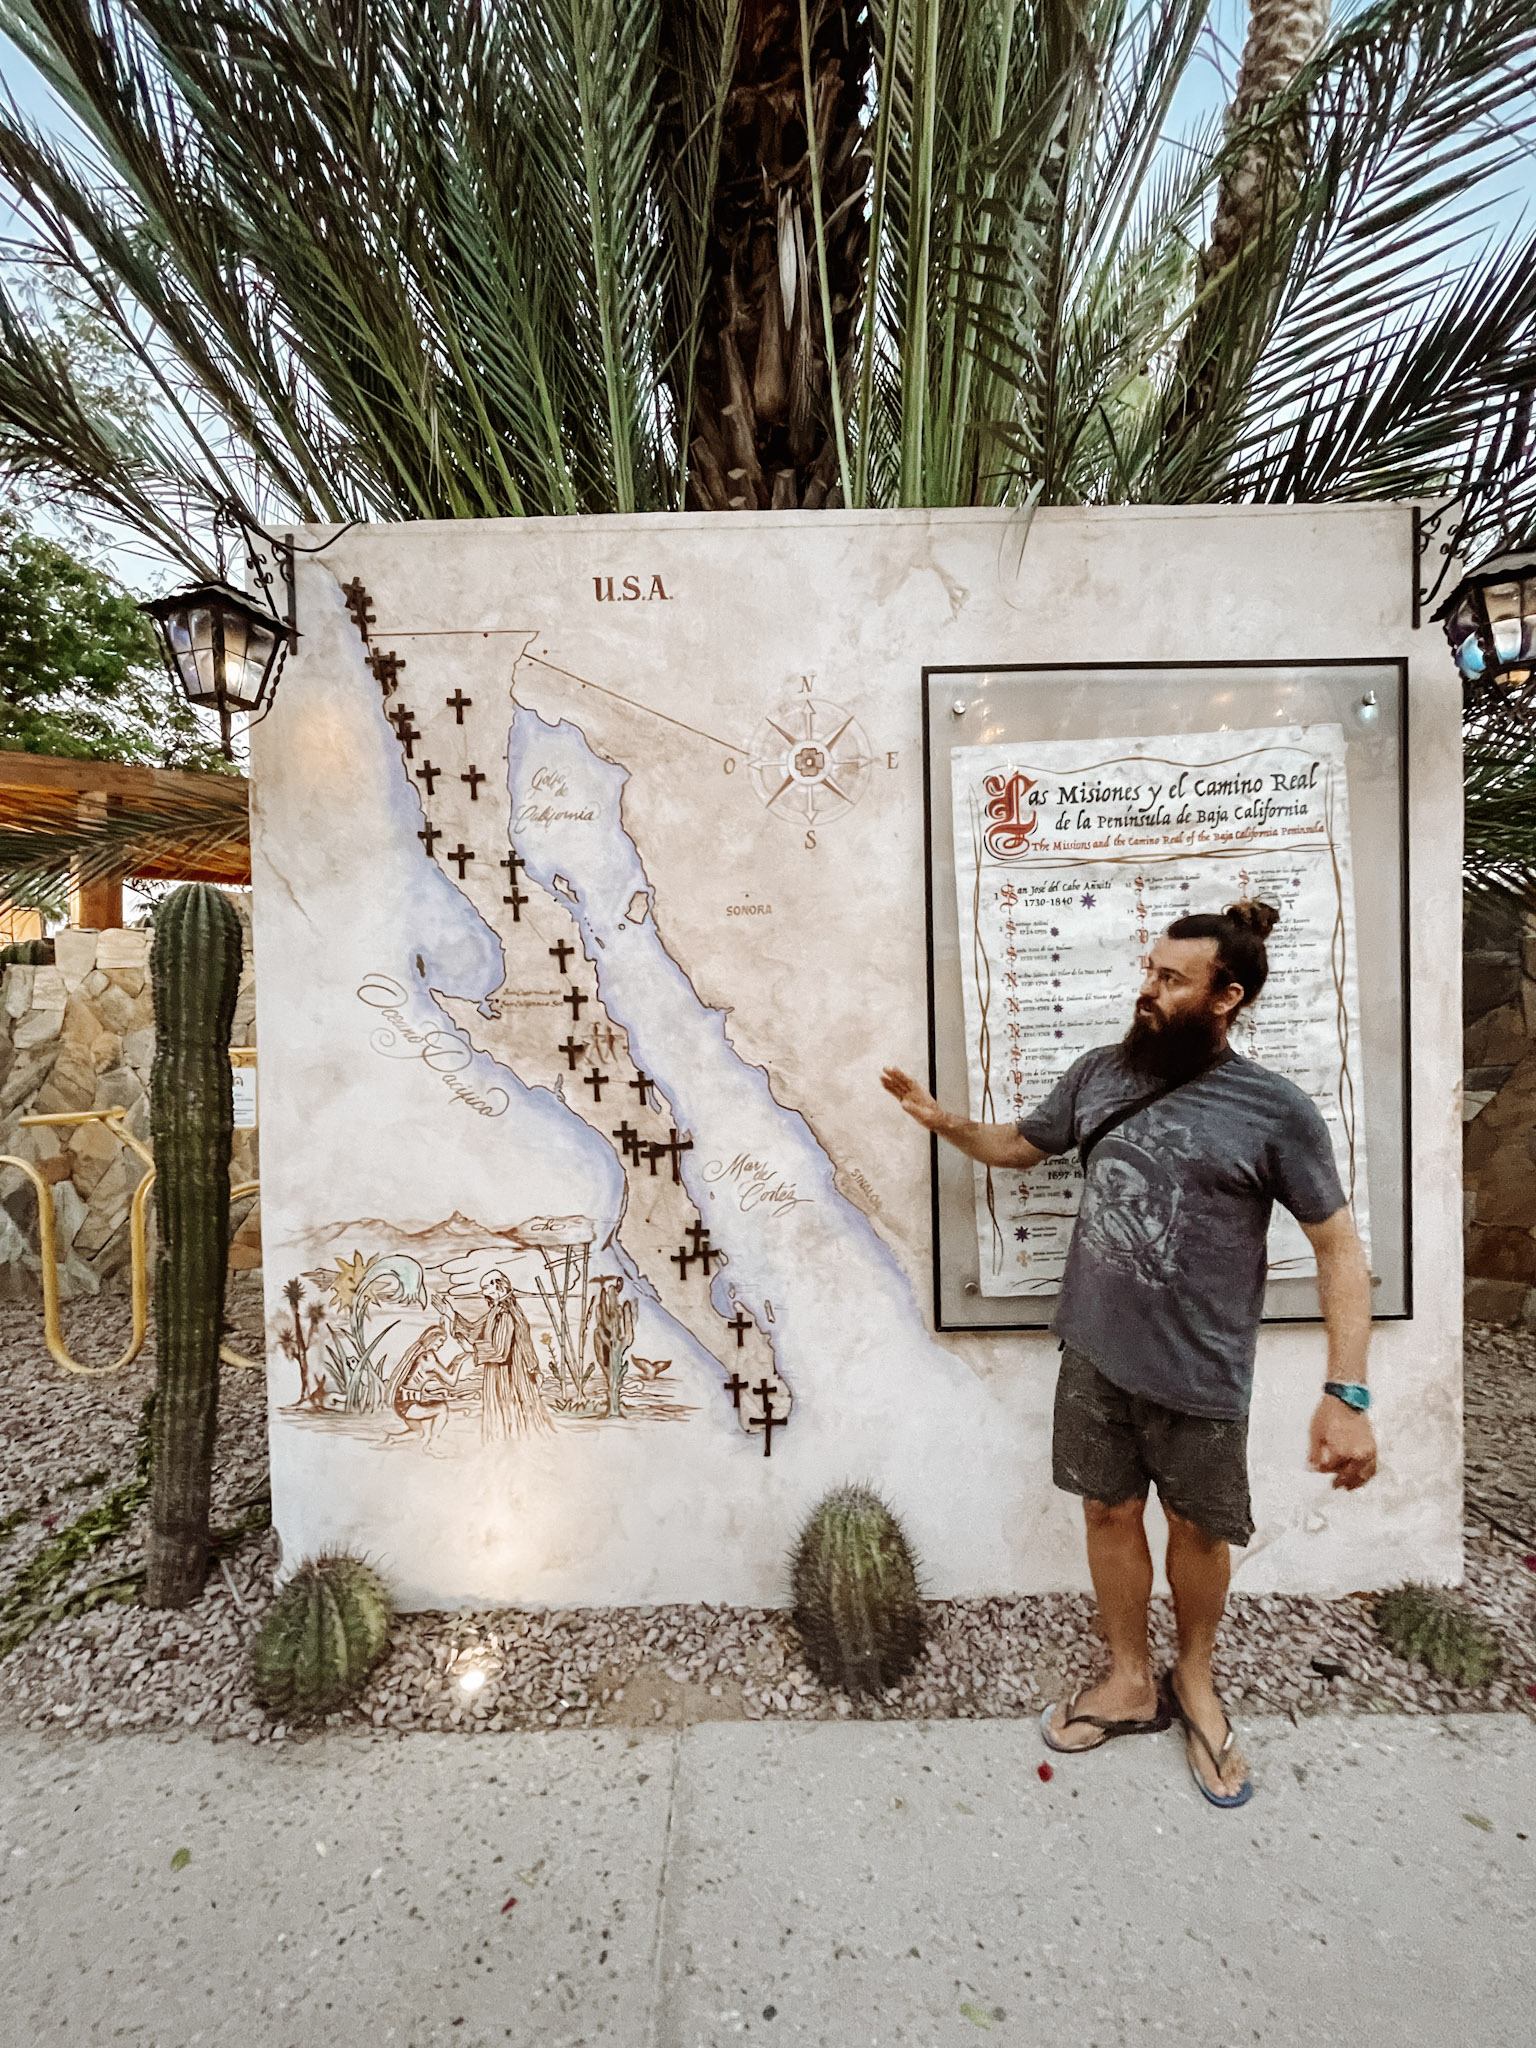 A guide pointing at a map during a city tour in Los Cabos